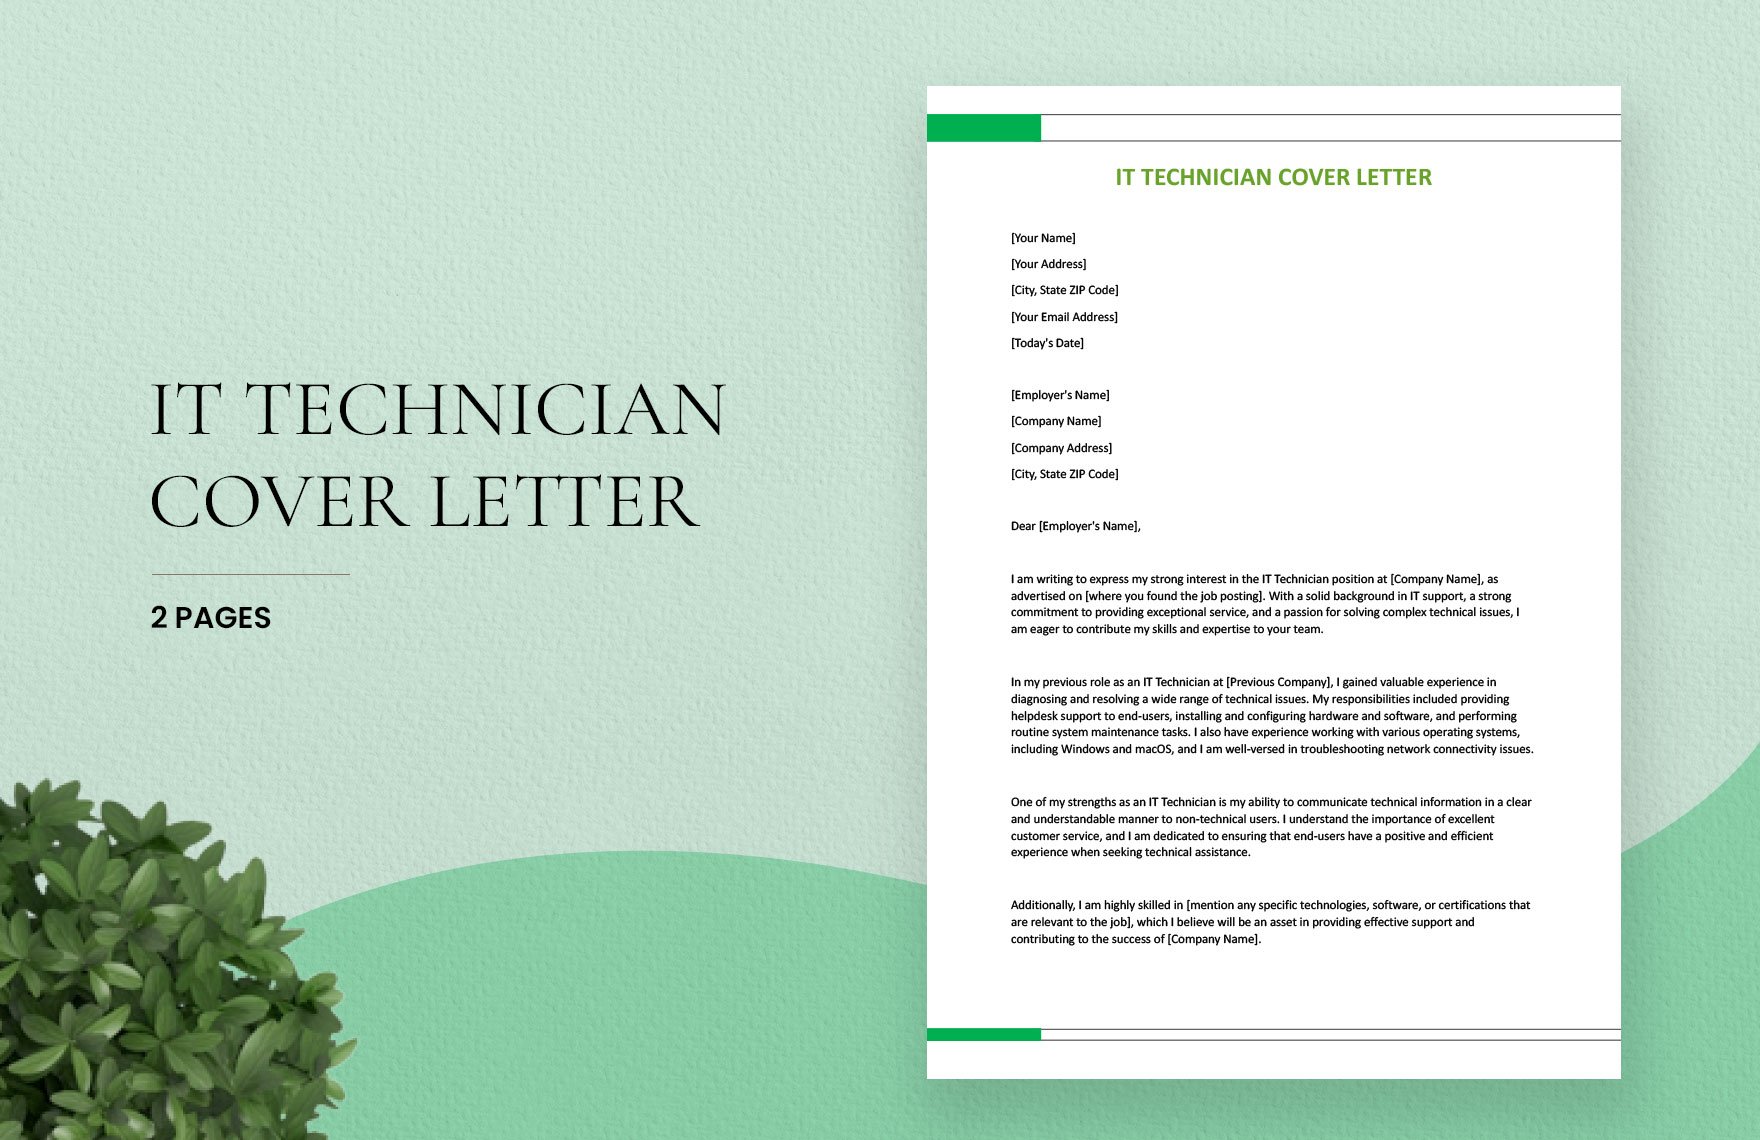 IT Technician Cover Letter in Word, Google Docs